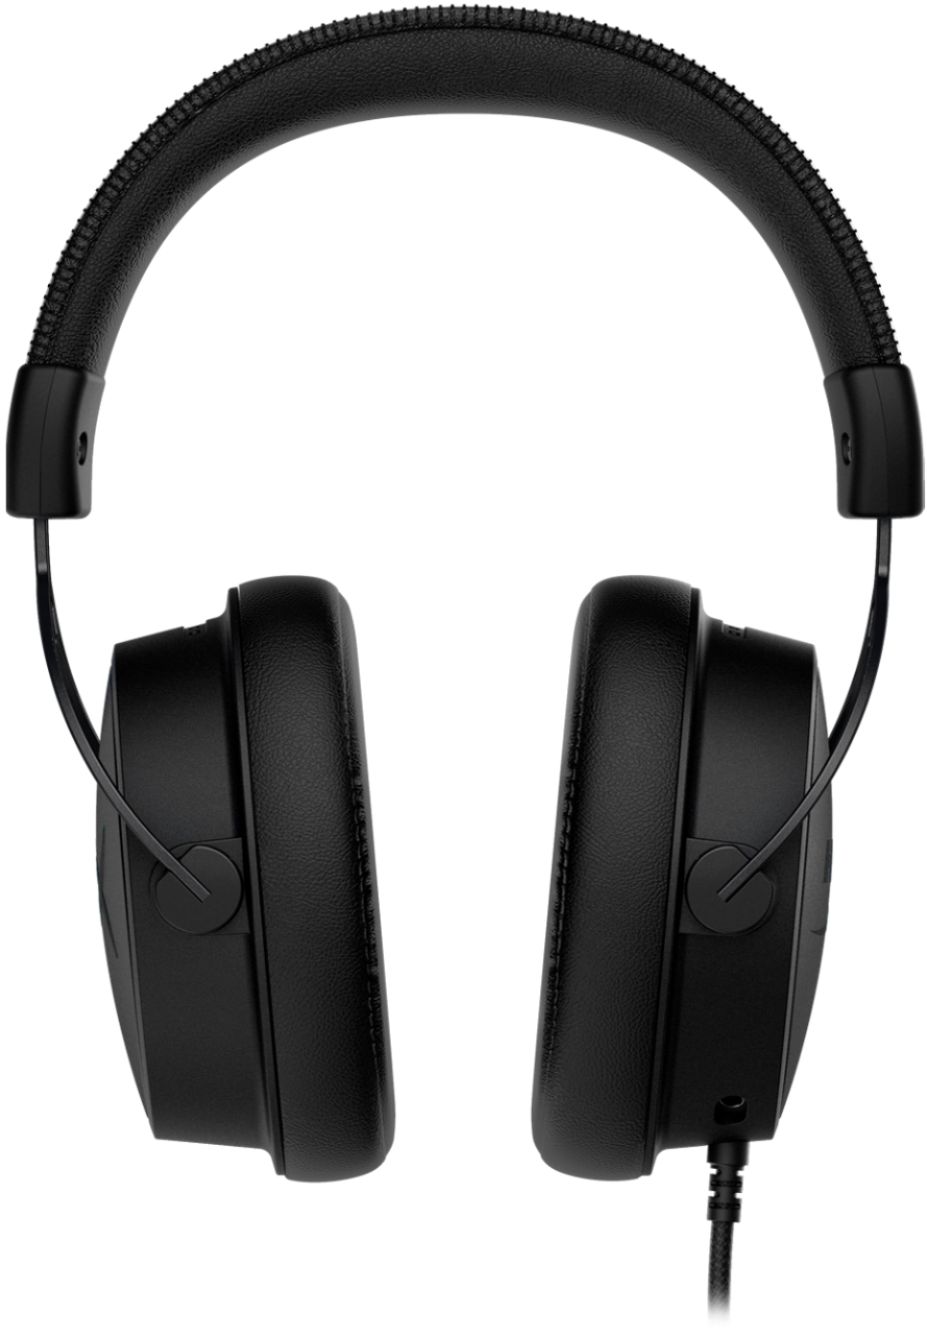 Hyperx Cloud Alpha S Wired 7 1 Surround Sound Gaming Headset For Pc With Chat Mixer And Adjustable Bass Blackout Hx Hscas Bk Ww Best Buy